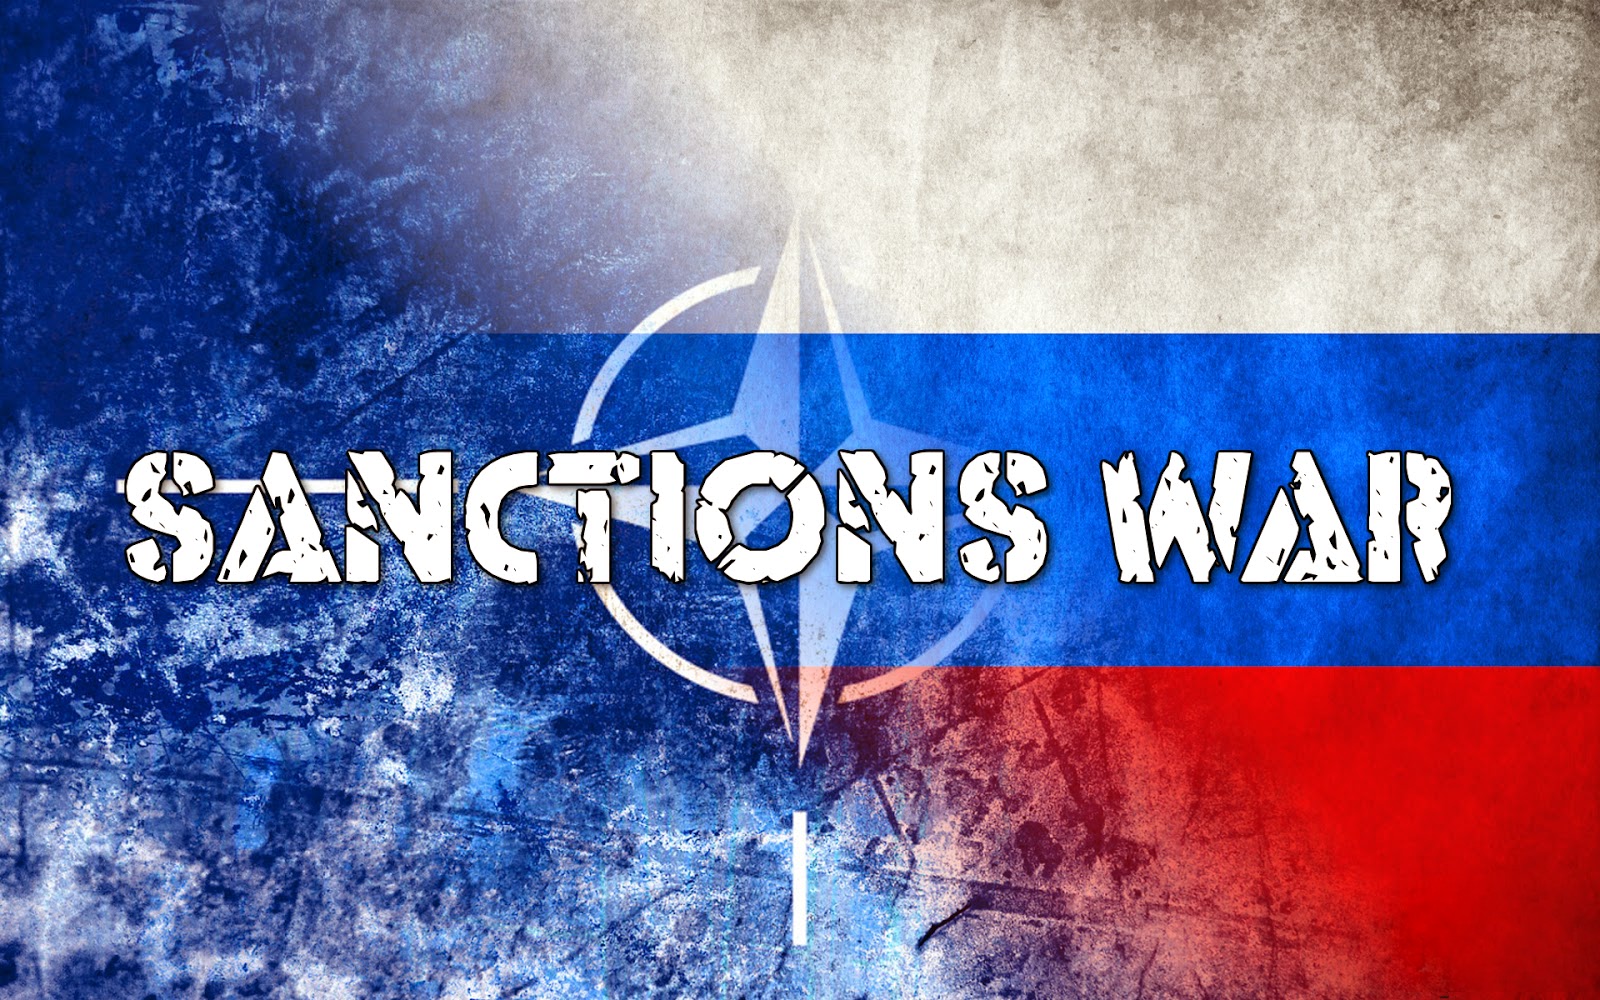 Britain not allows lifting sanctions against Russia before Minsk agreements are implemented